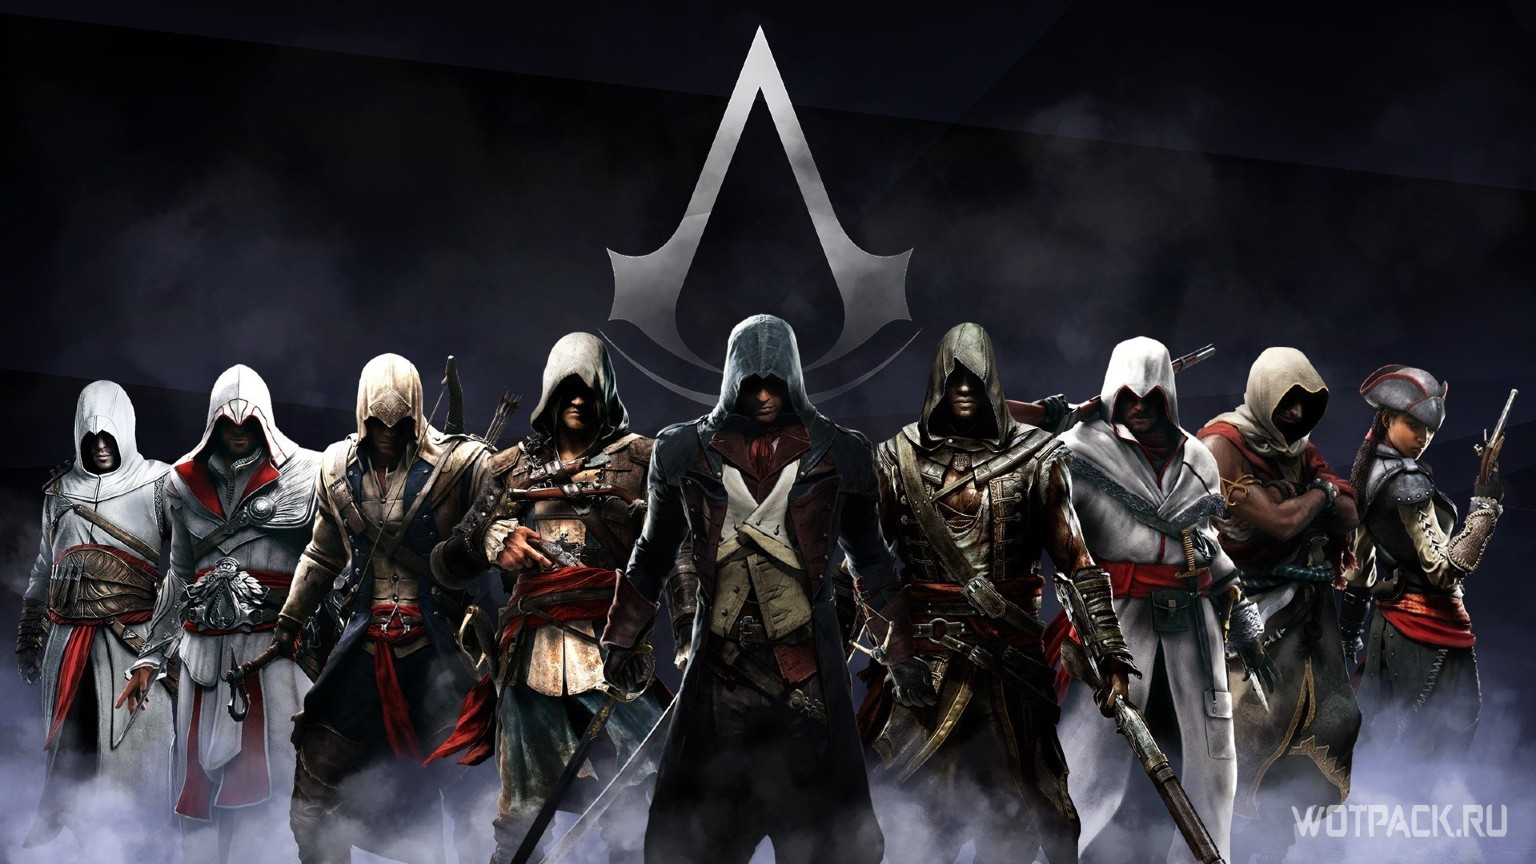 The best armor and armor sets in Assassin's Creed (all parts)